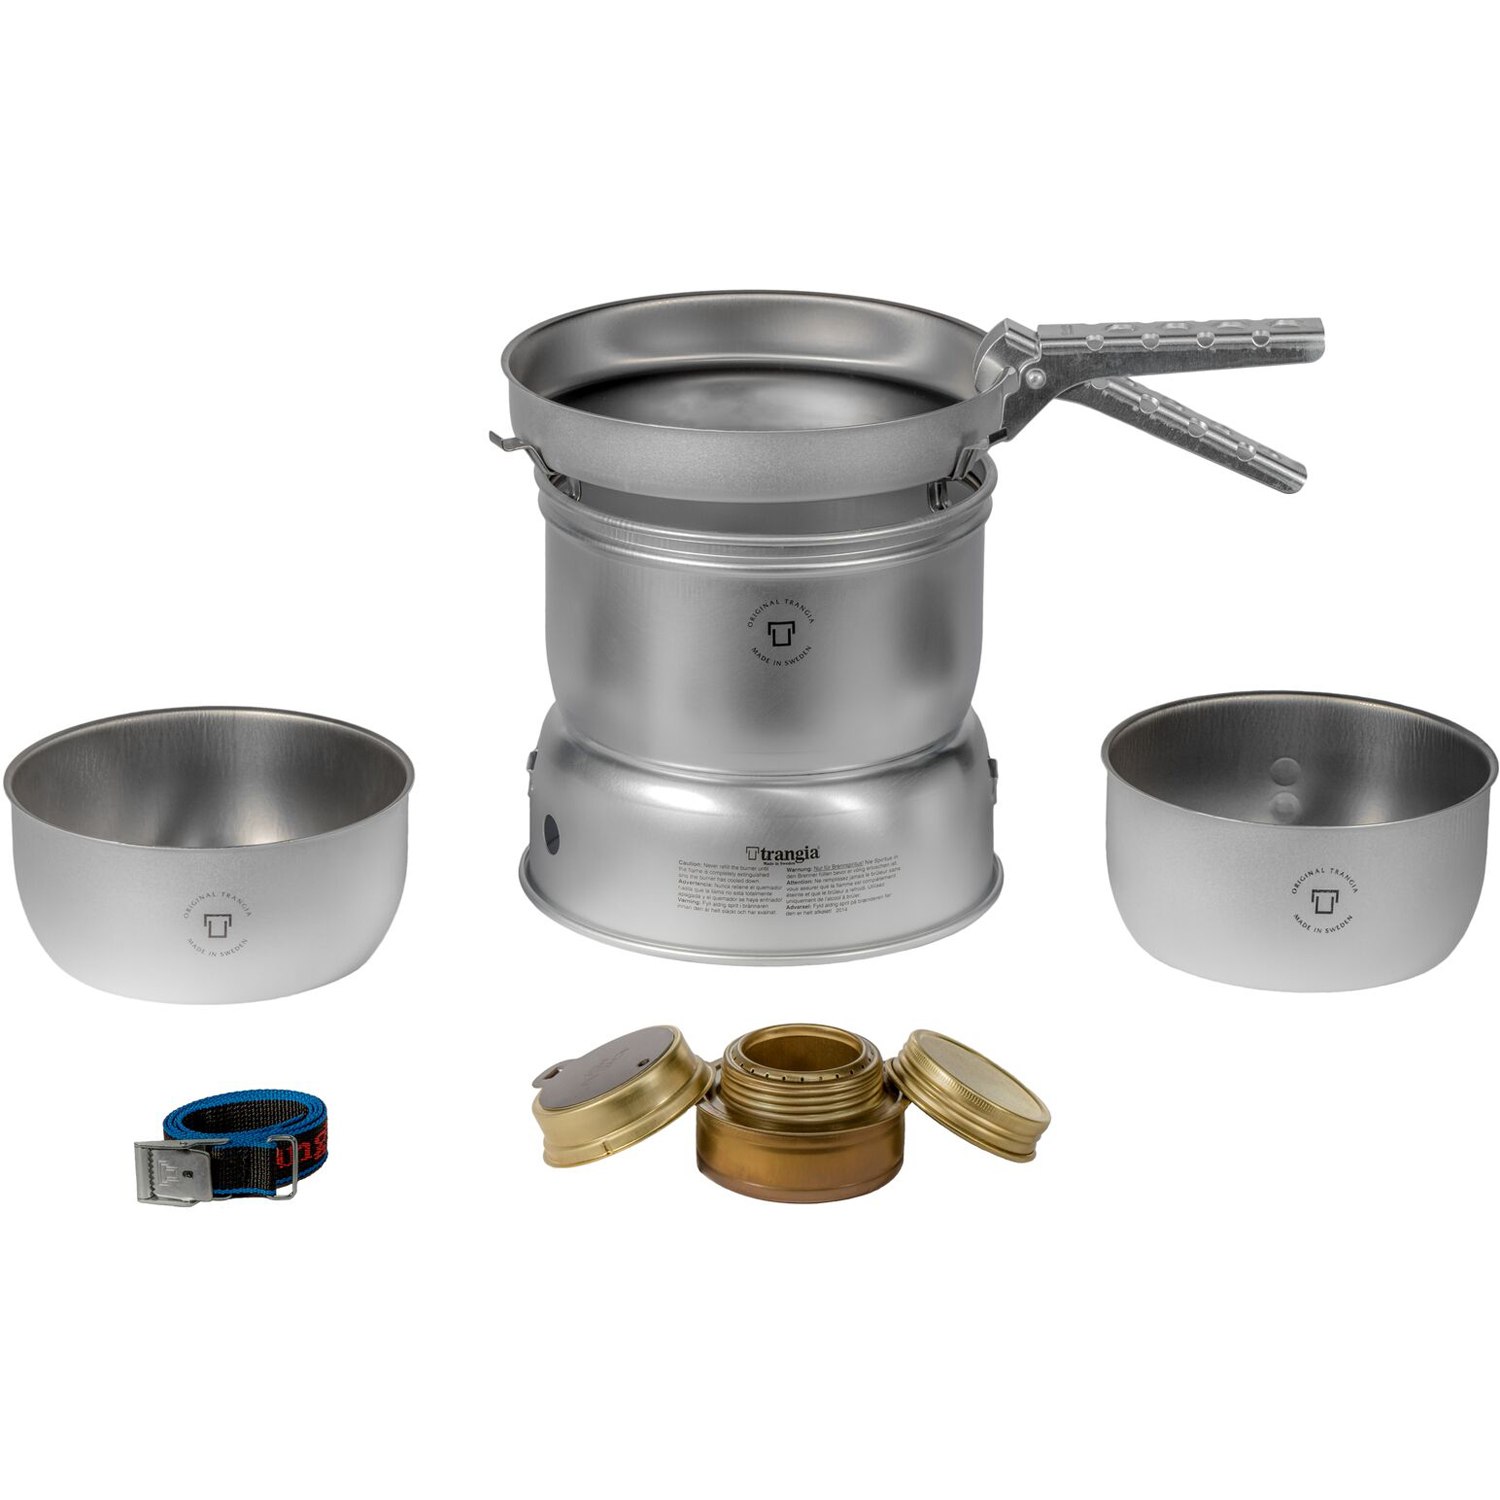 Picture of Trangia Storm Cooker 27-21 UL/D - Stove System Duossal 2.0